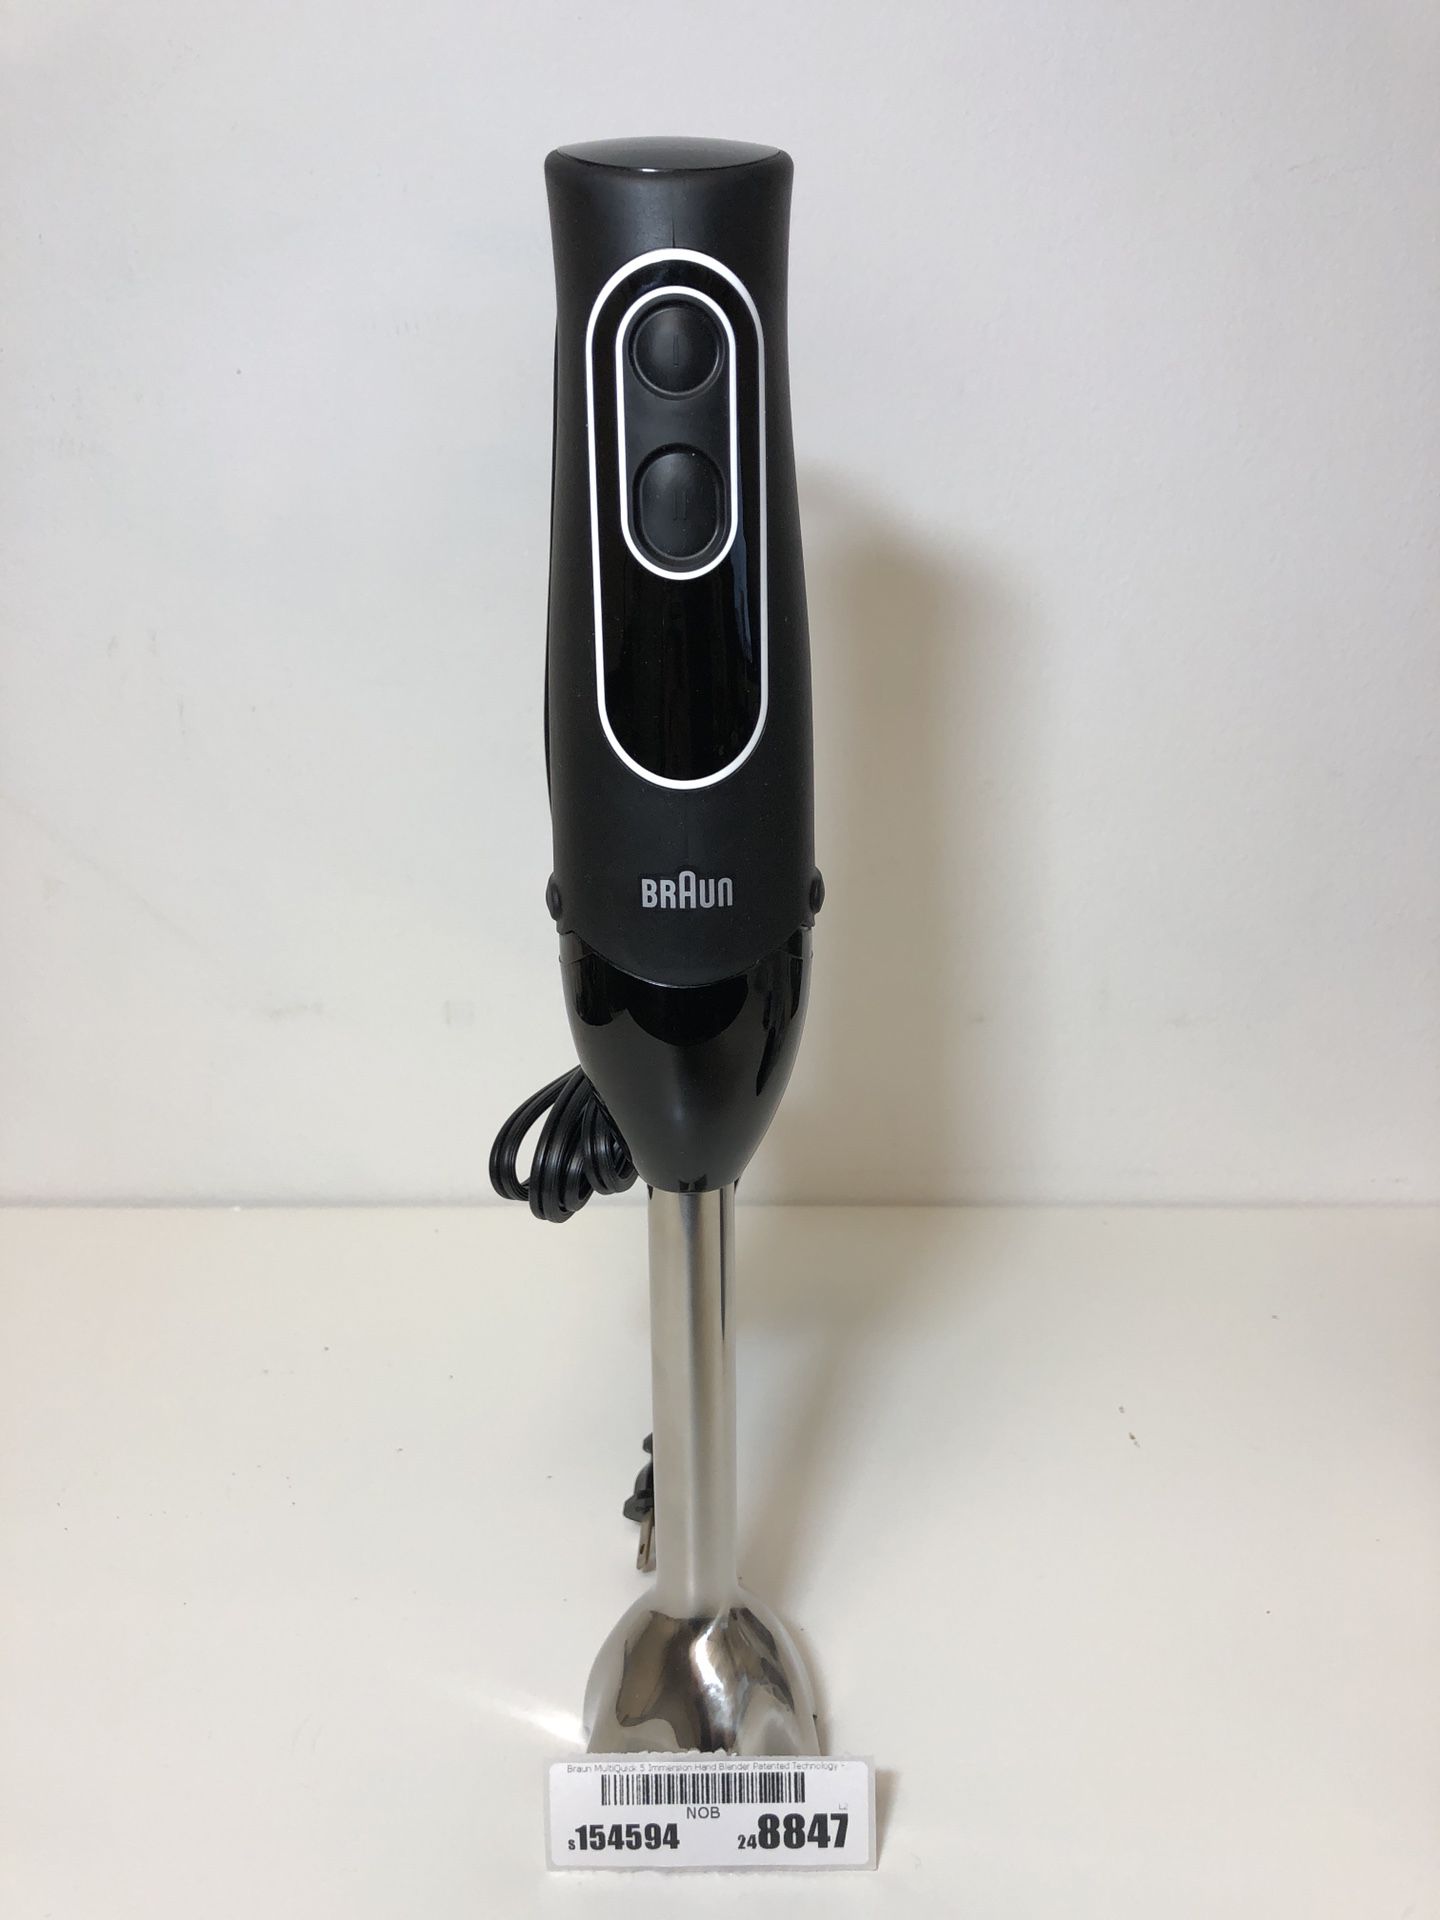 NEW! Braun MultiQuick 5 Immersion Hand Blender Patented Technology -  Powerful 350 Watt - Dual Speed - Includes Beaker, Whisk, 505 - S154594 for  Sale in Elk Grove Village, IL - OfferUp